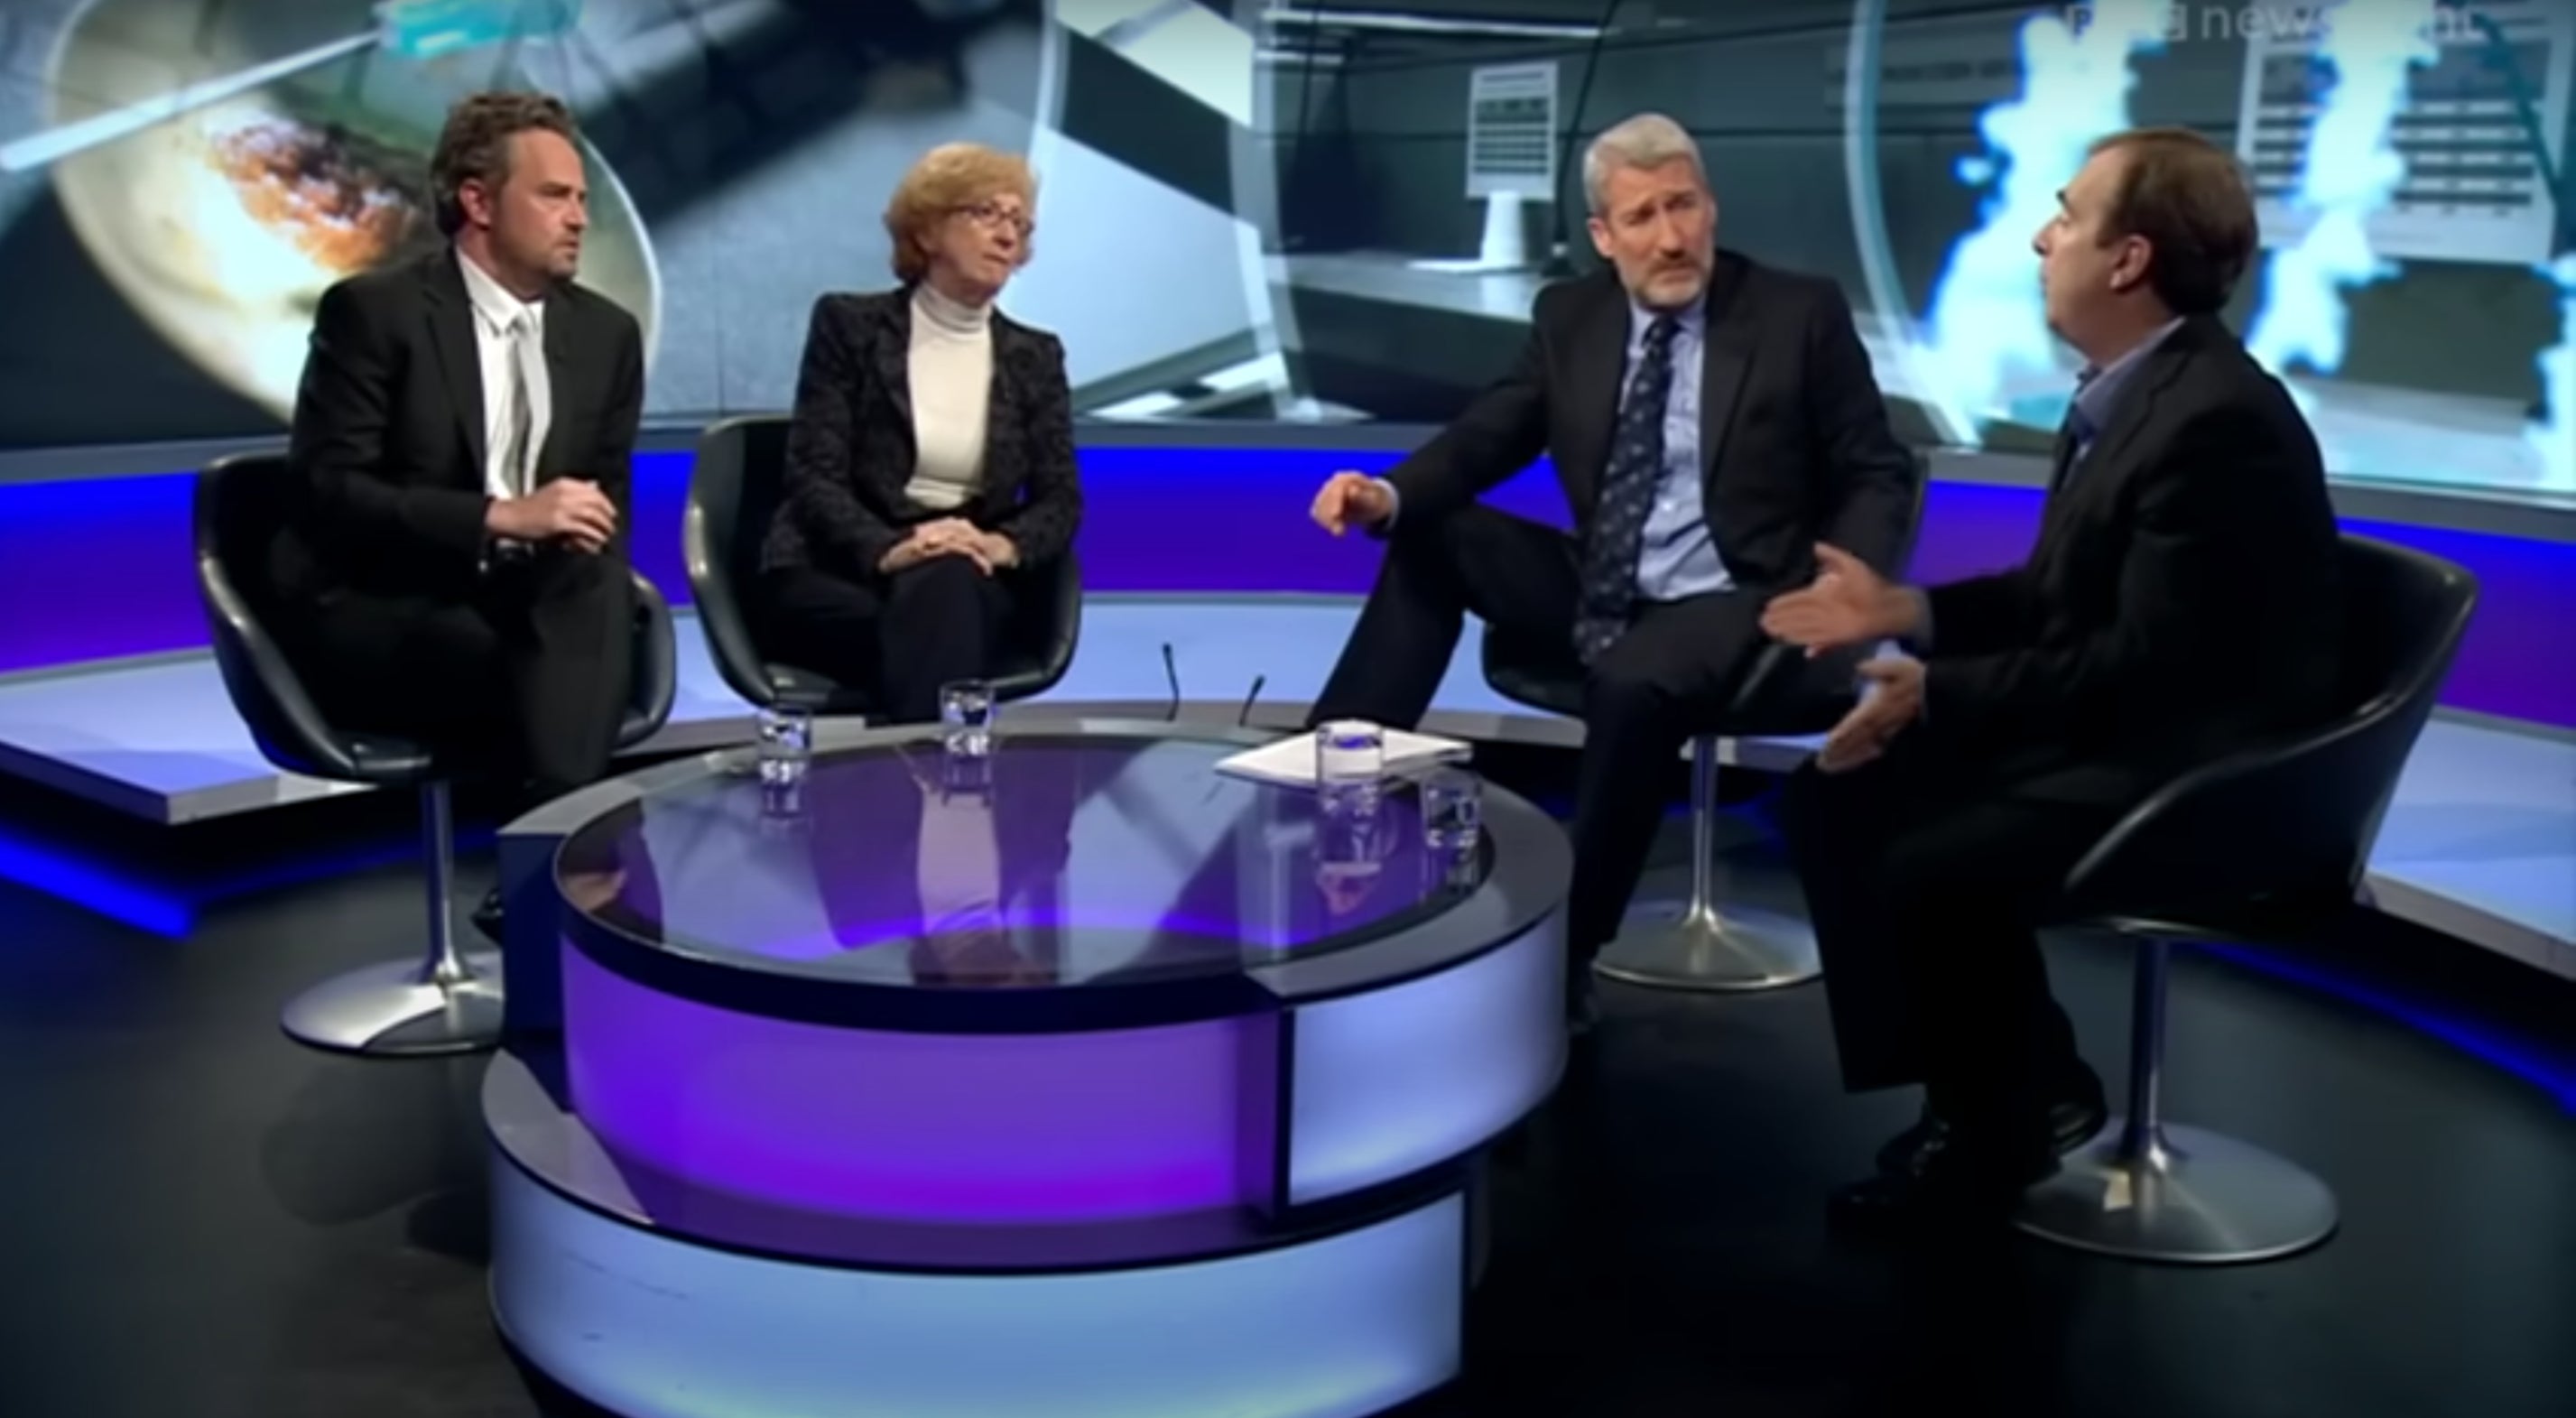 From L-R: Matthew Perry, Baroness Meacher, Jeremy Paxman, Peter Hitchens on ‘Newsnight’ in 2013